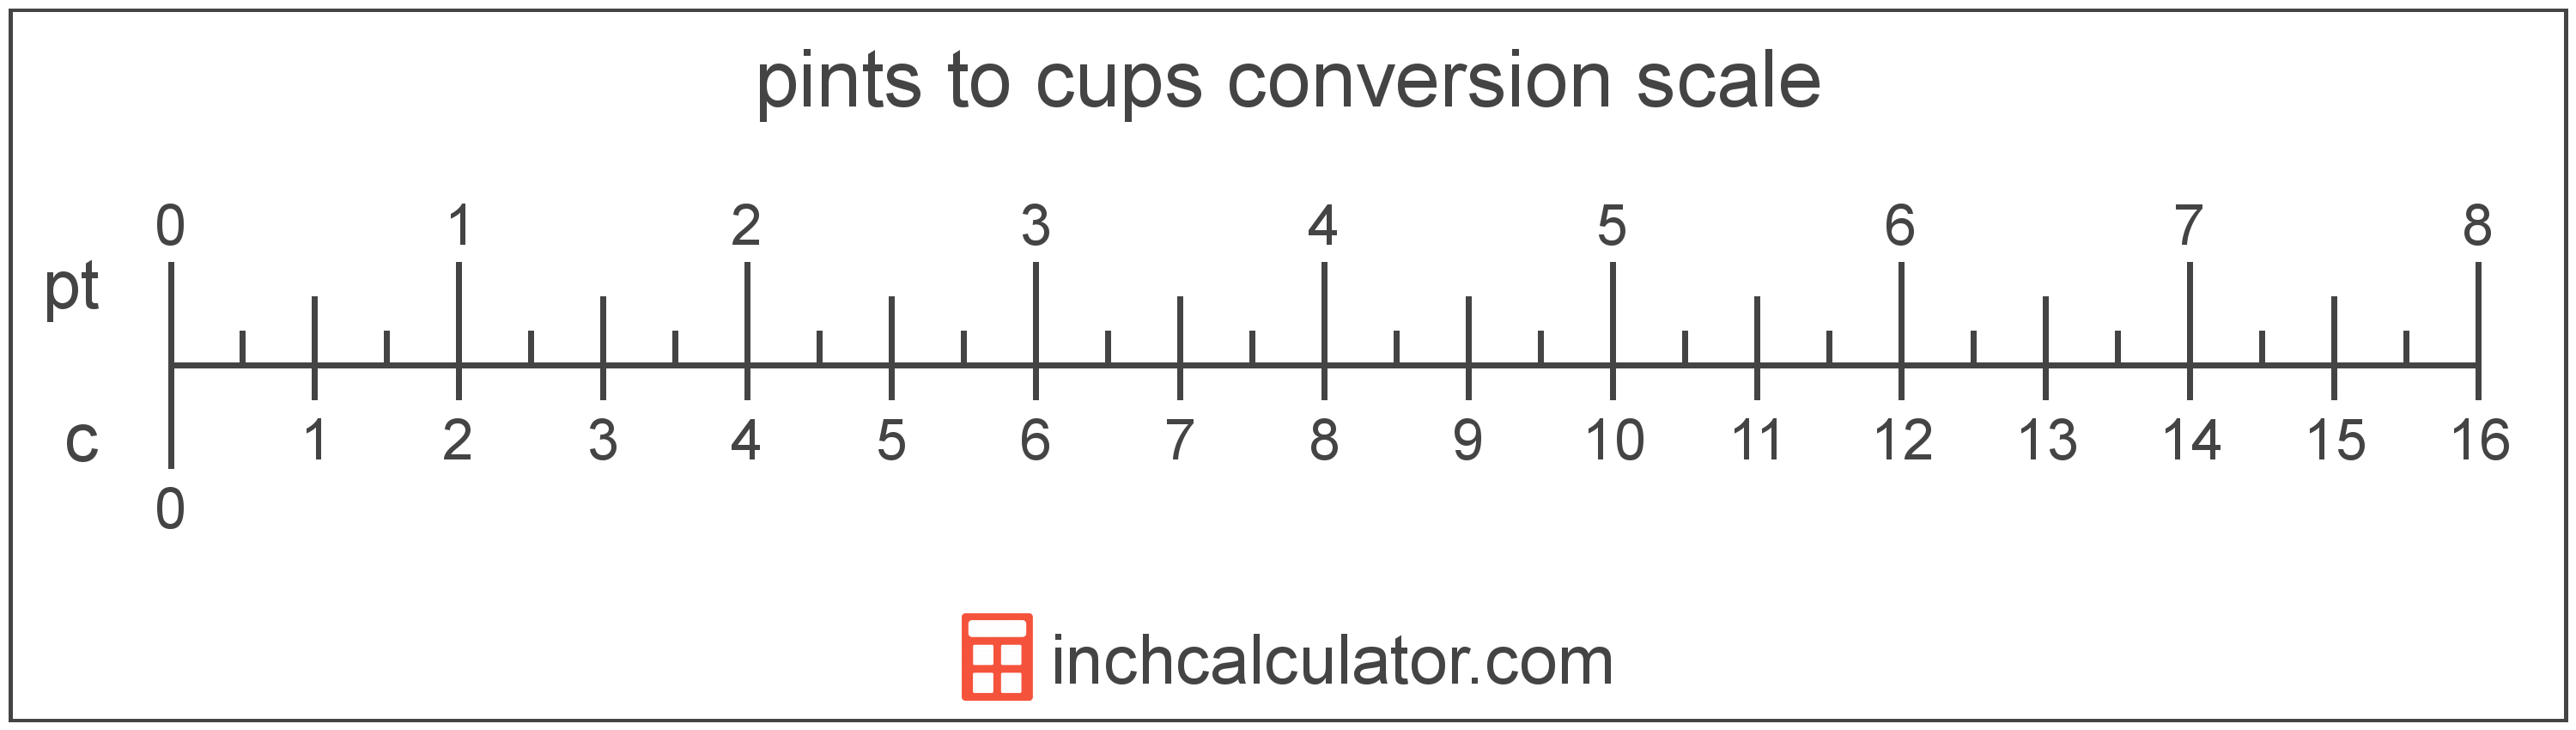 pints-to-cups-conversion-pt-to-c-inch-calculator